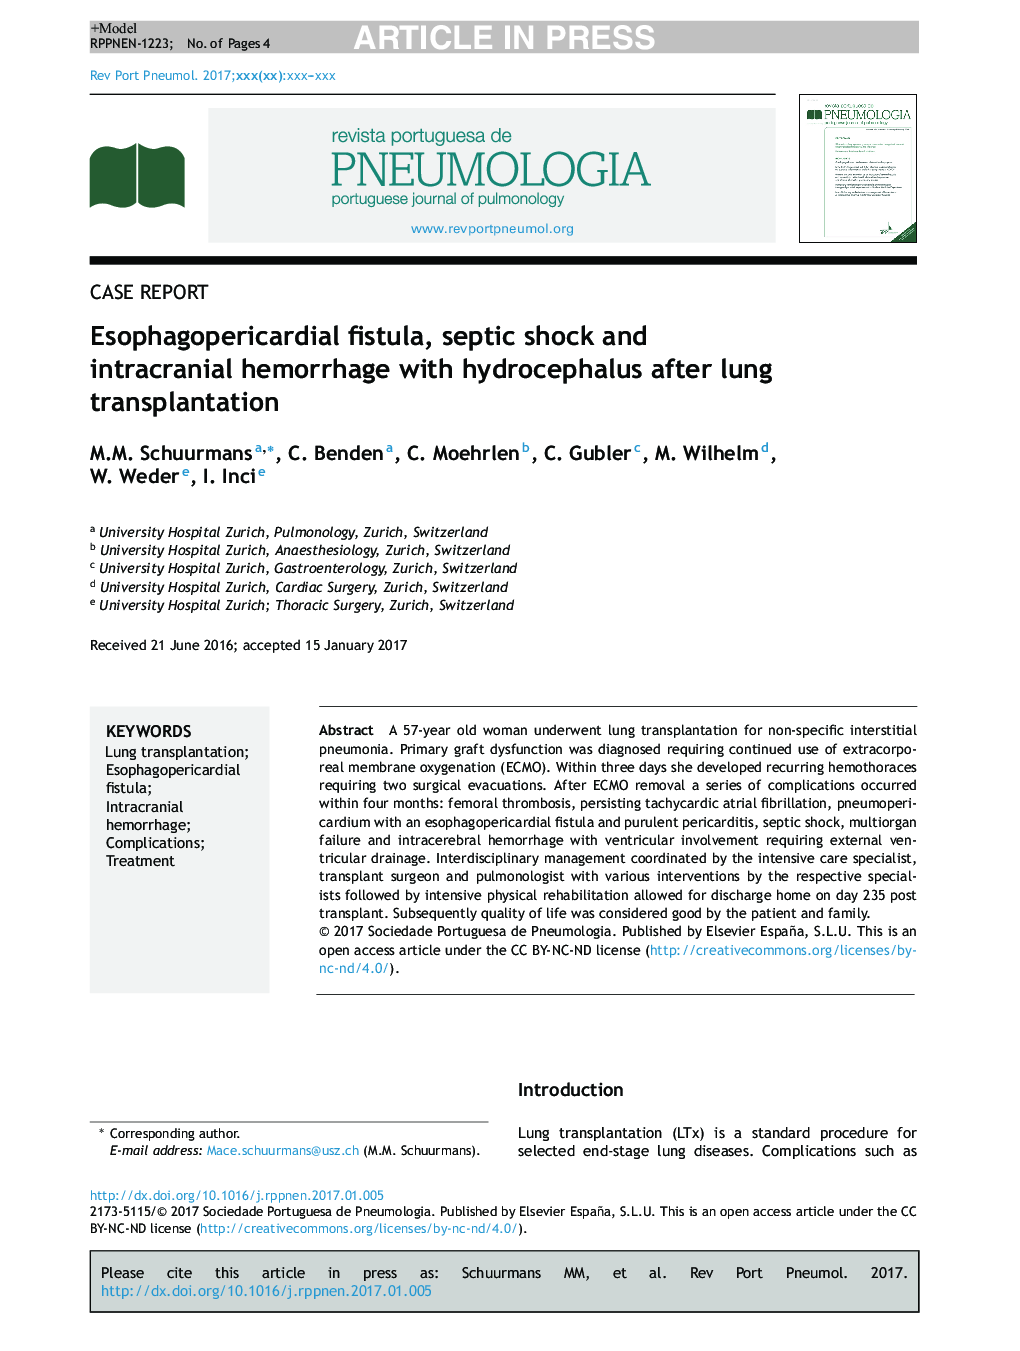 Esophagopericardial fistula, septic shock and intracranial hemorrhage with hydrocephalus after lung transplantation